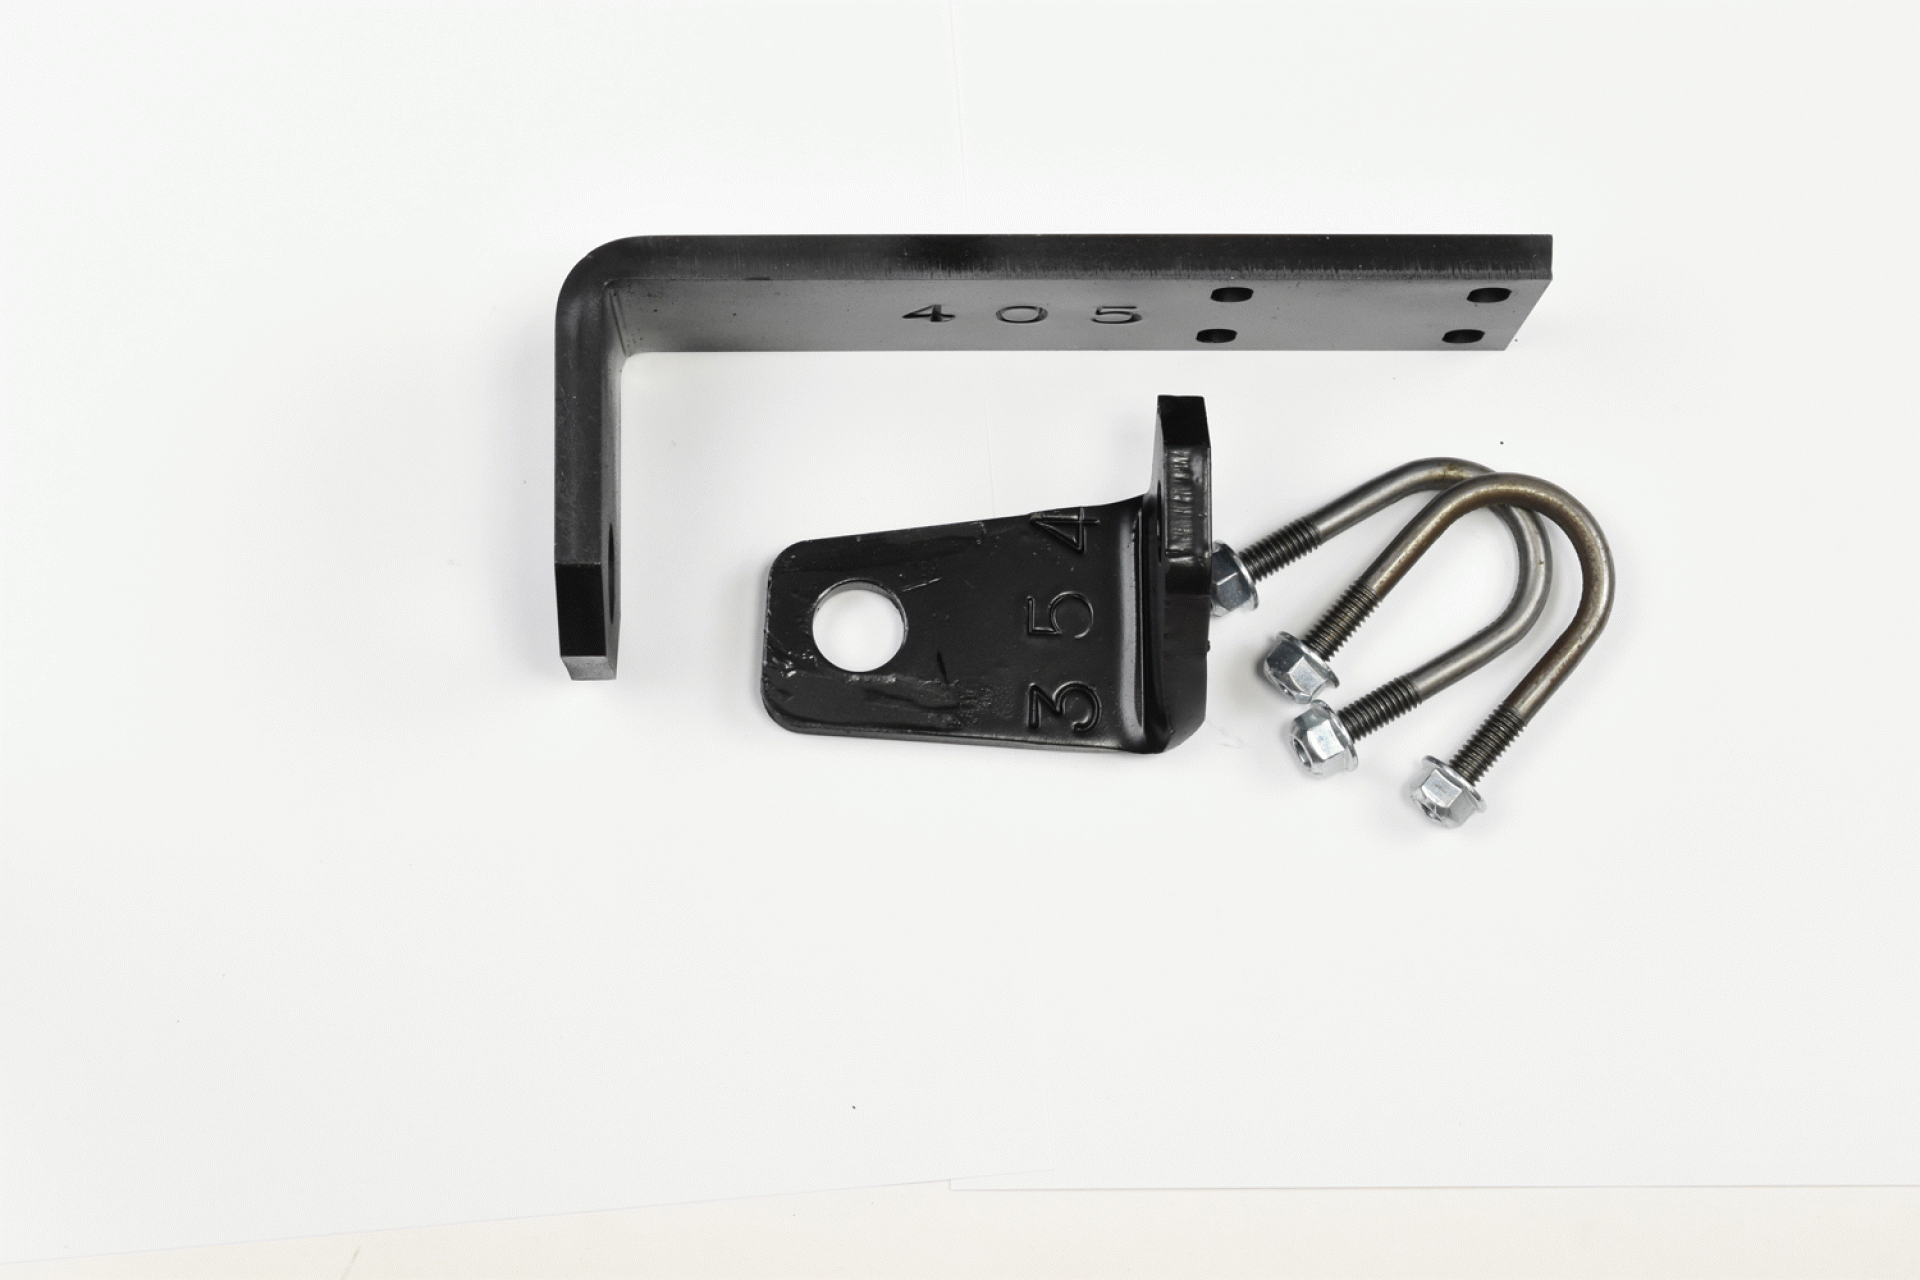 SAFE T PLUS | C-354K14 | Mounting Hardware for Chevrolet 3500/4500 Class C